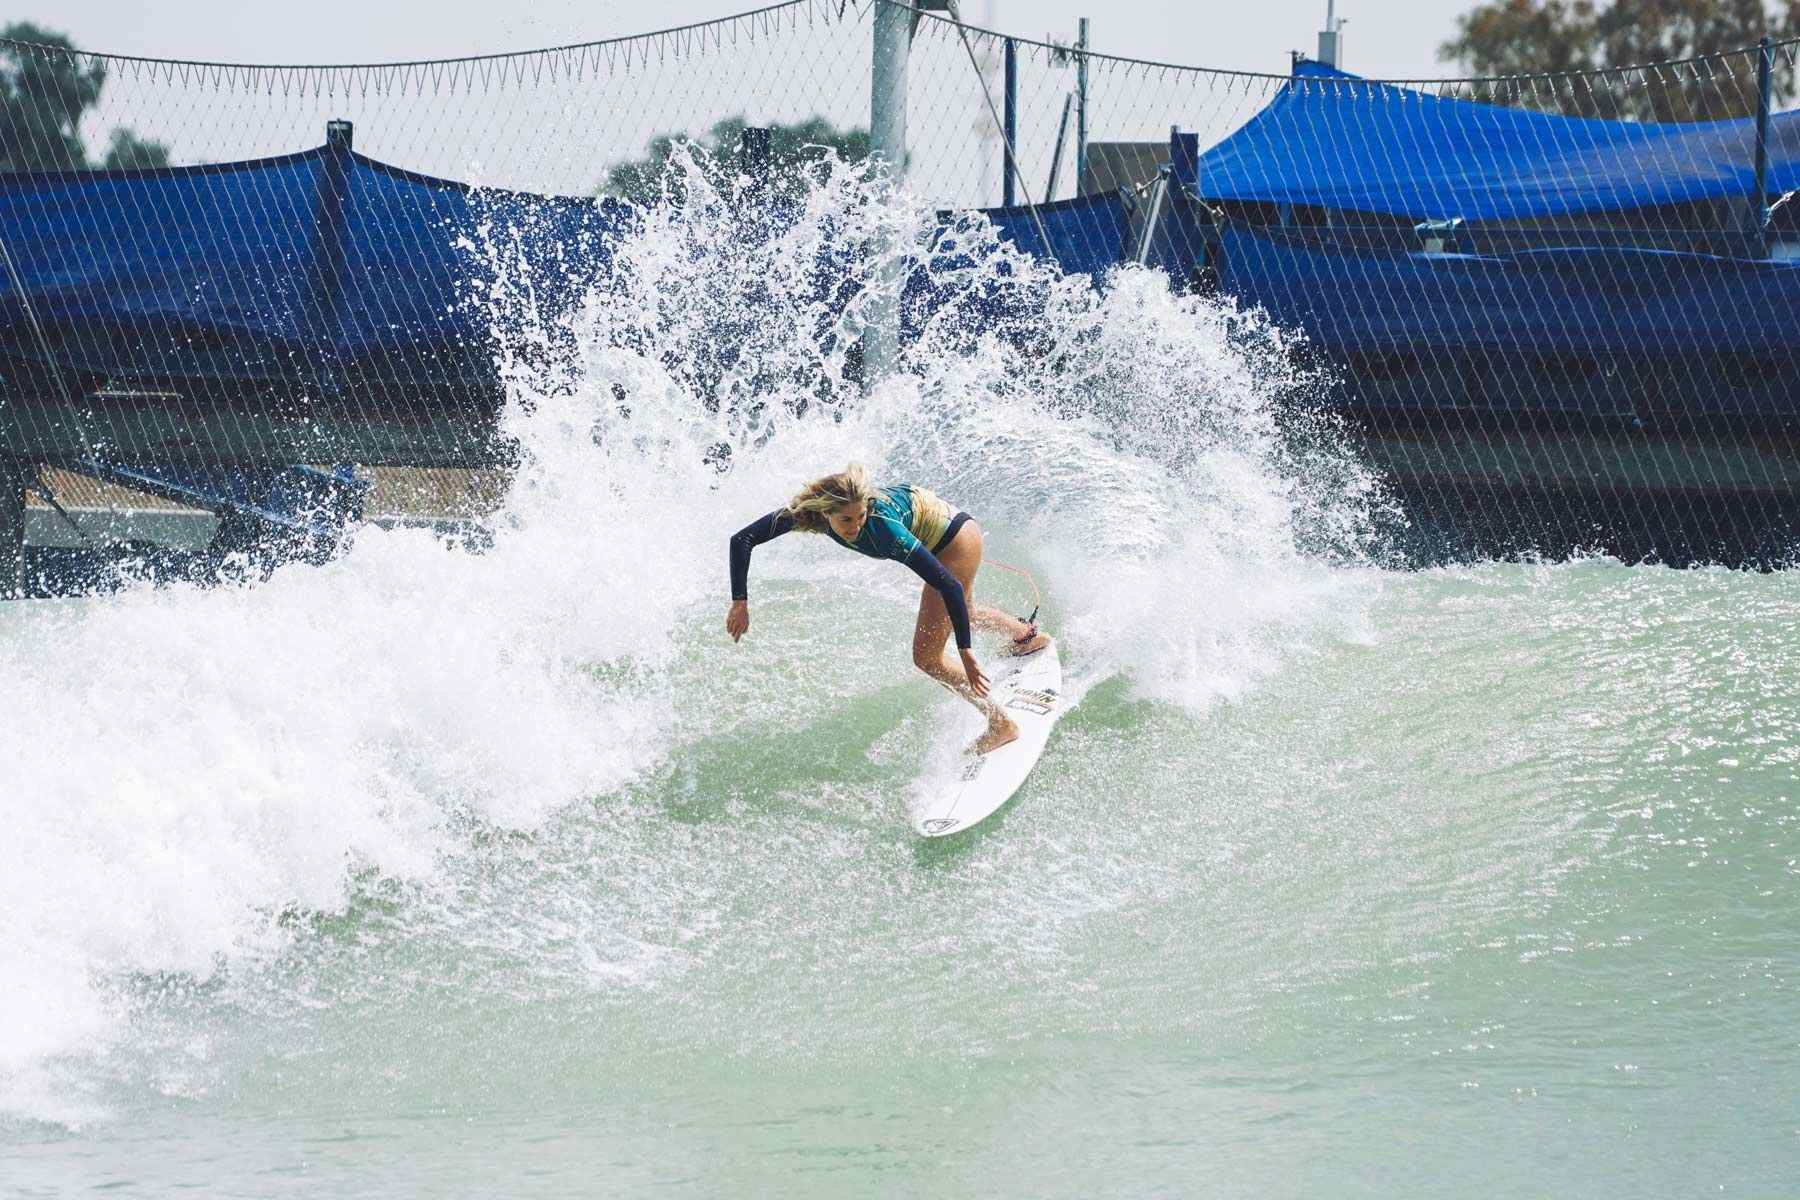 stephanie gilmore competing at surf ranch